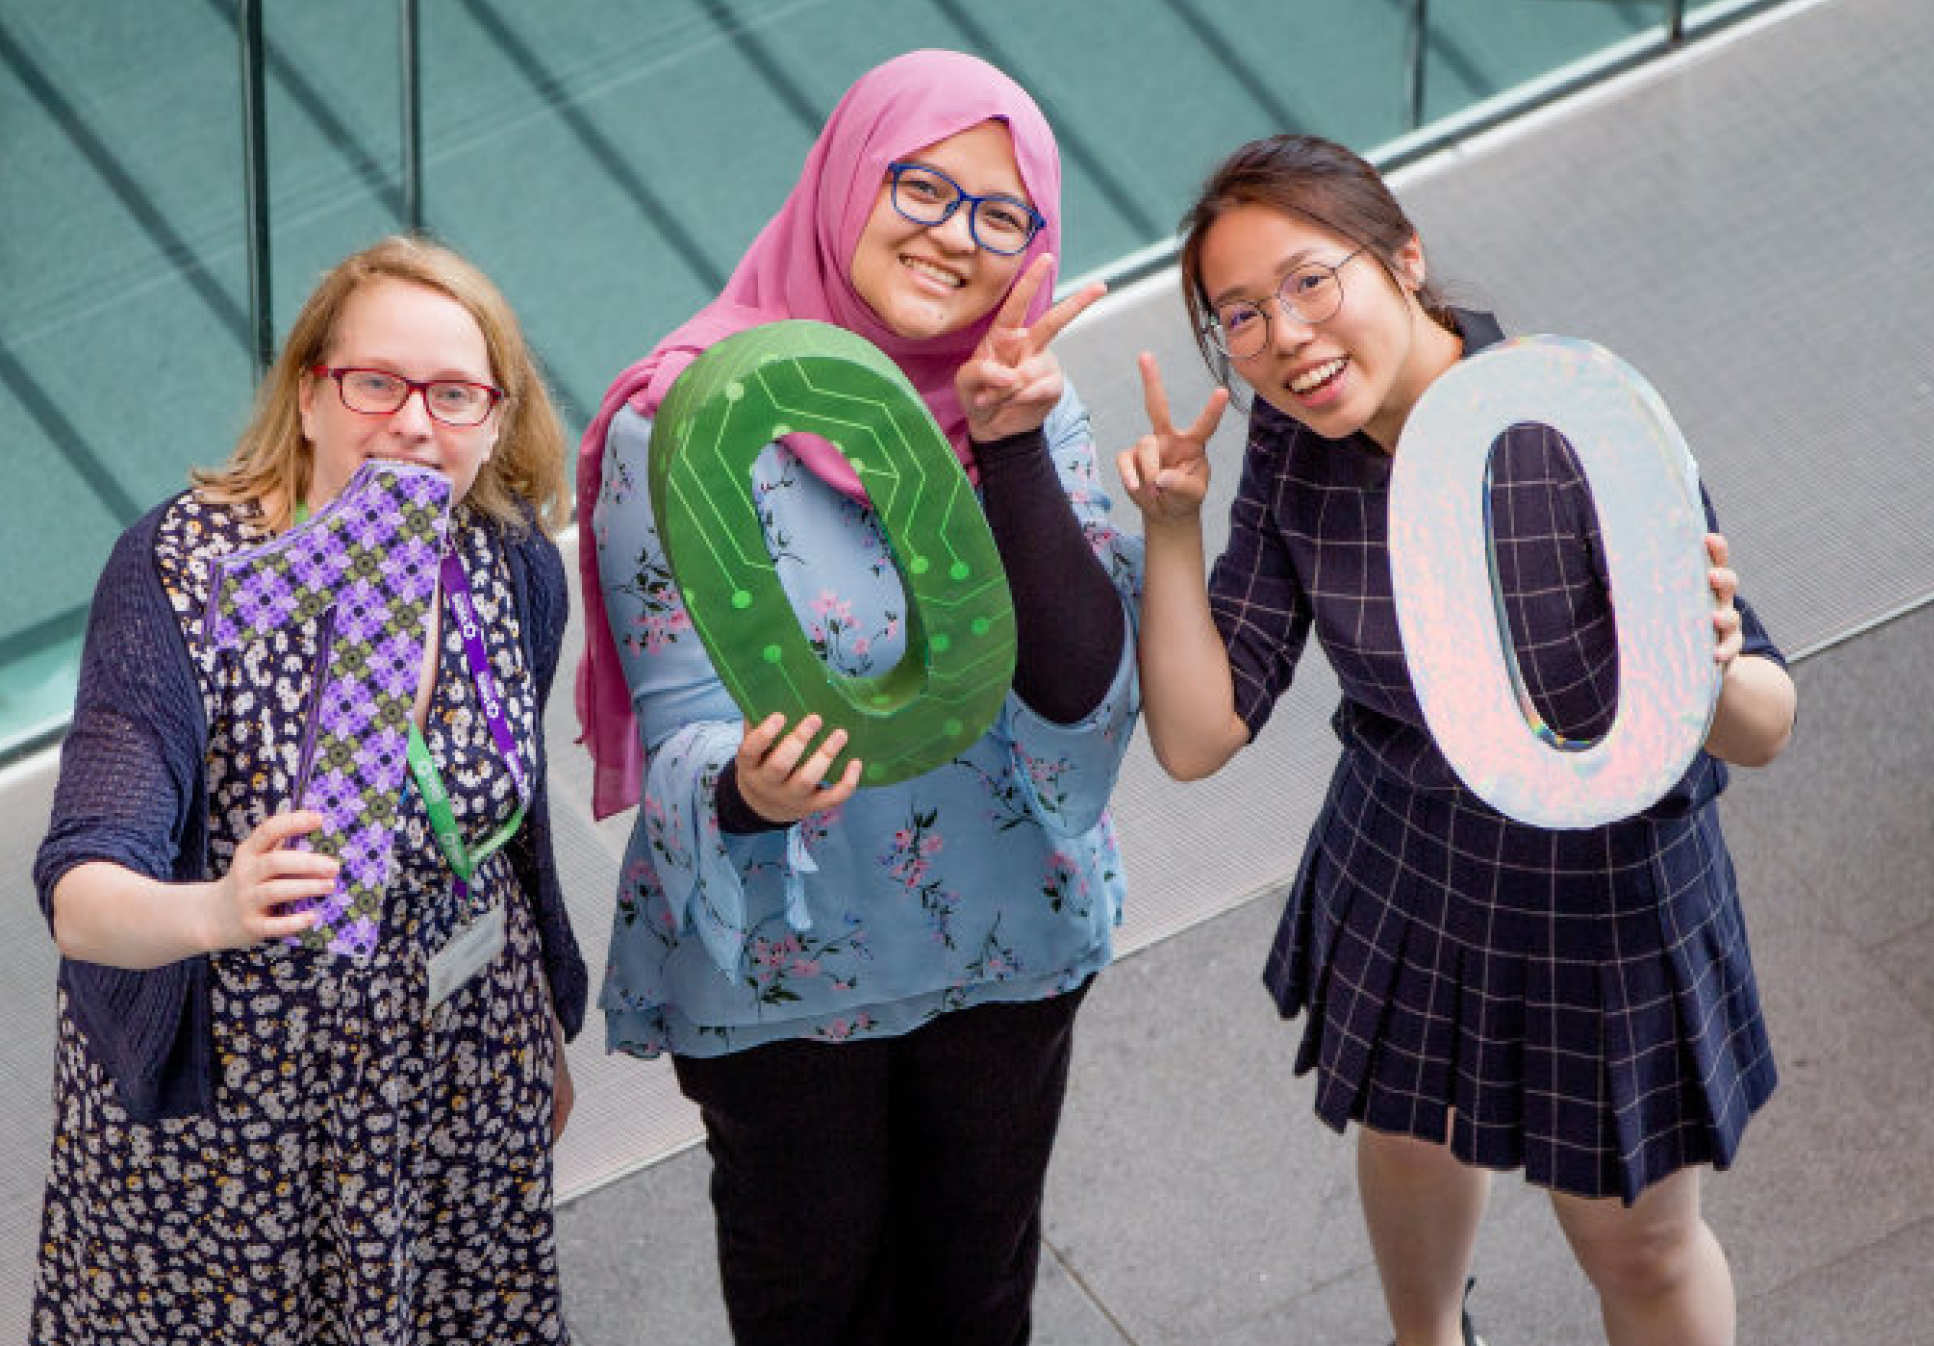 Imperial staff and students celebrate 100 years of the Women’s Engineering Society